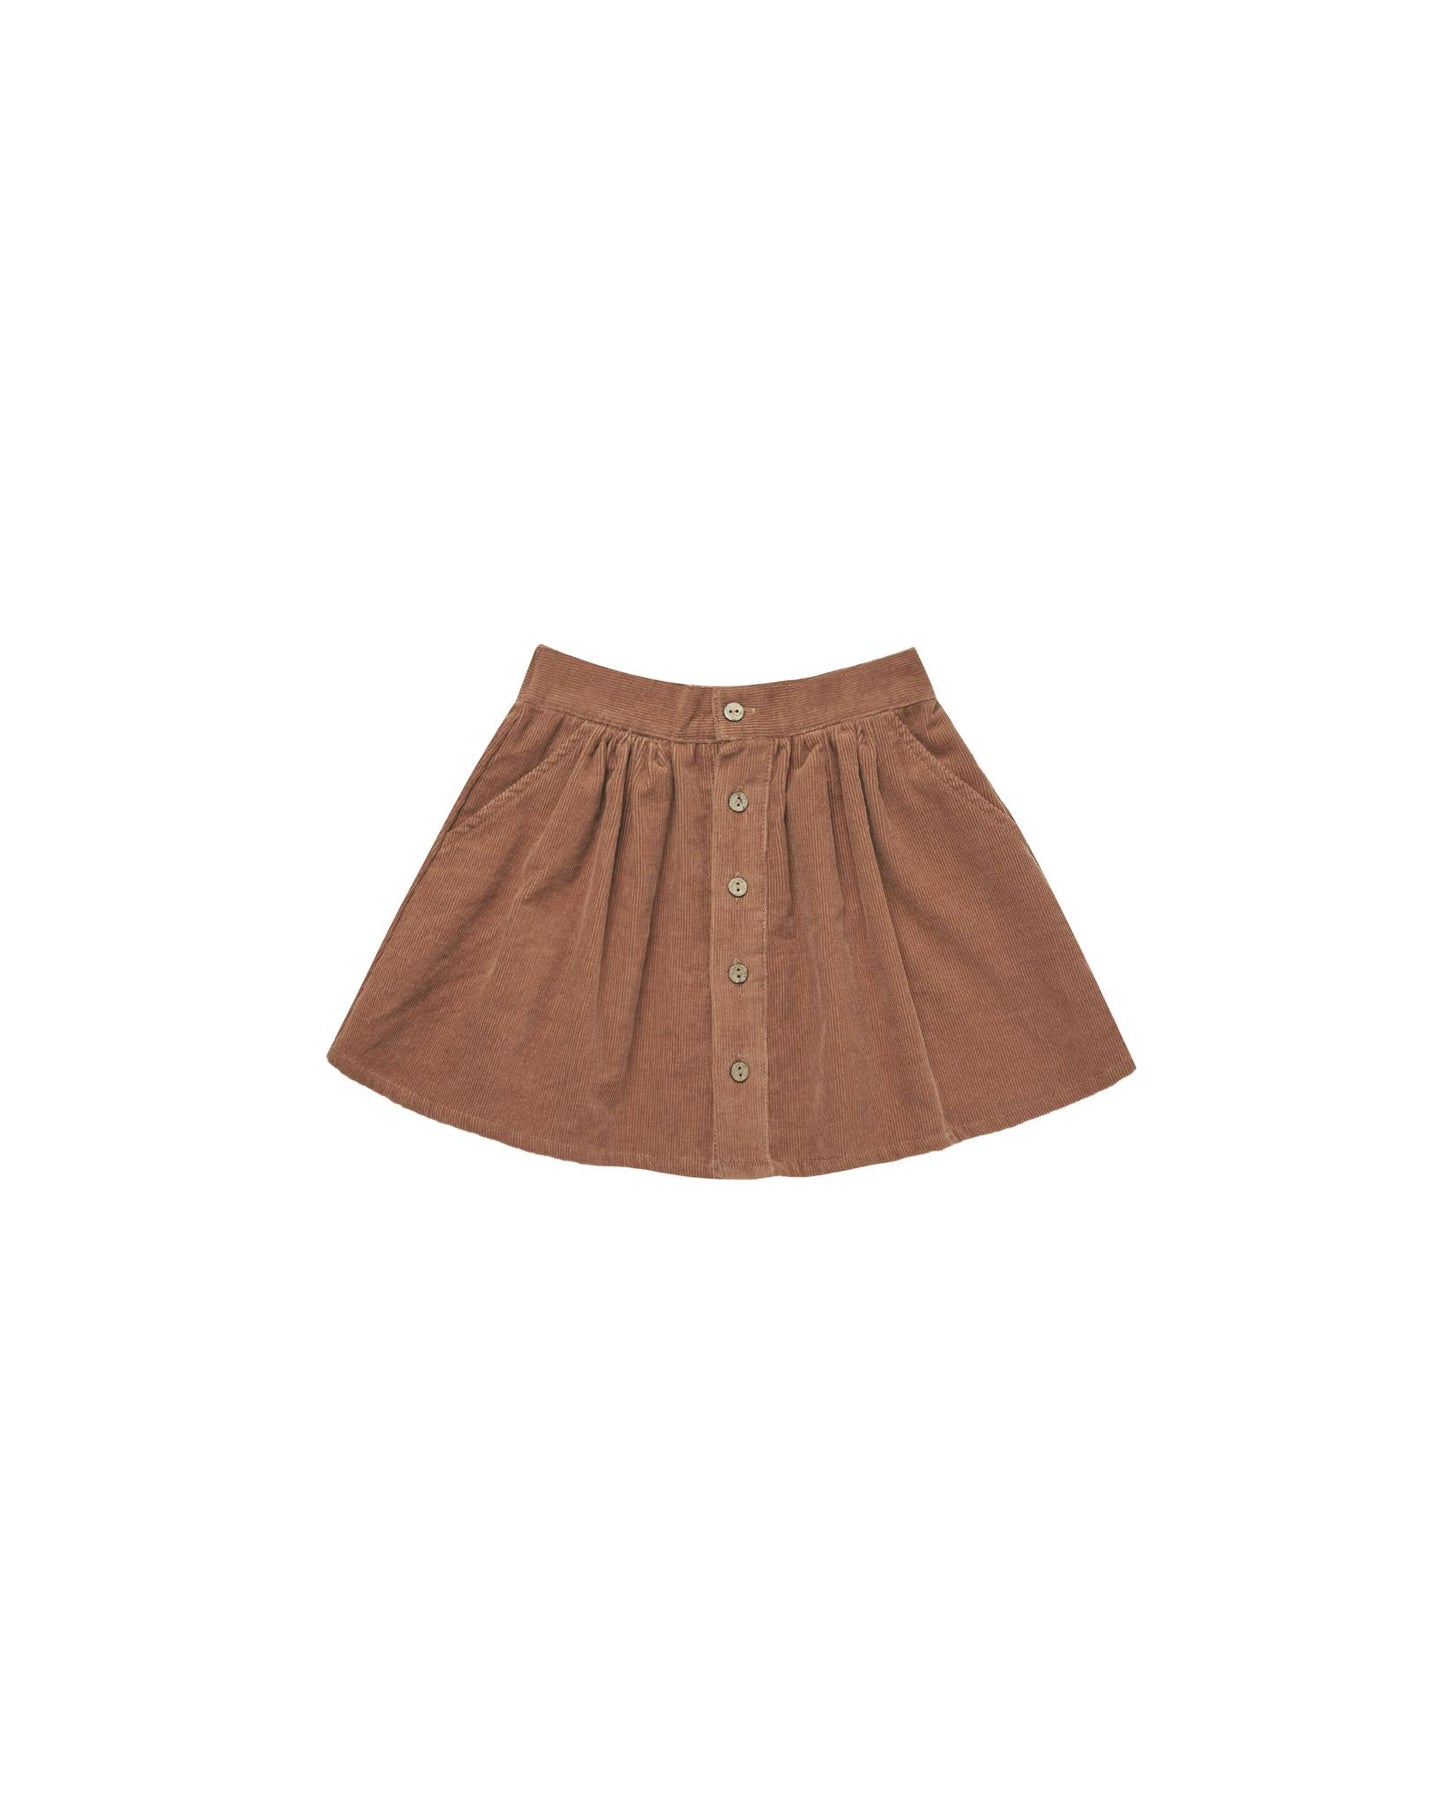 BUTTON FRONT MINI SKIRT || SPICE